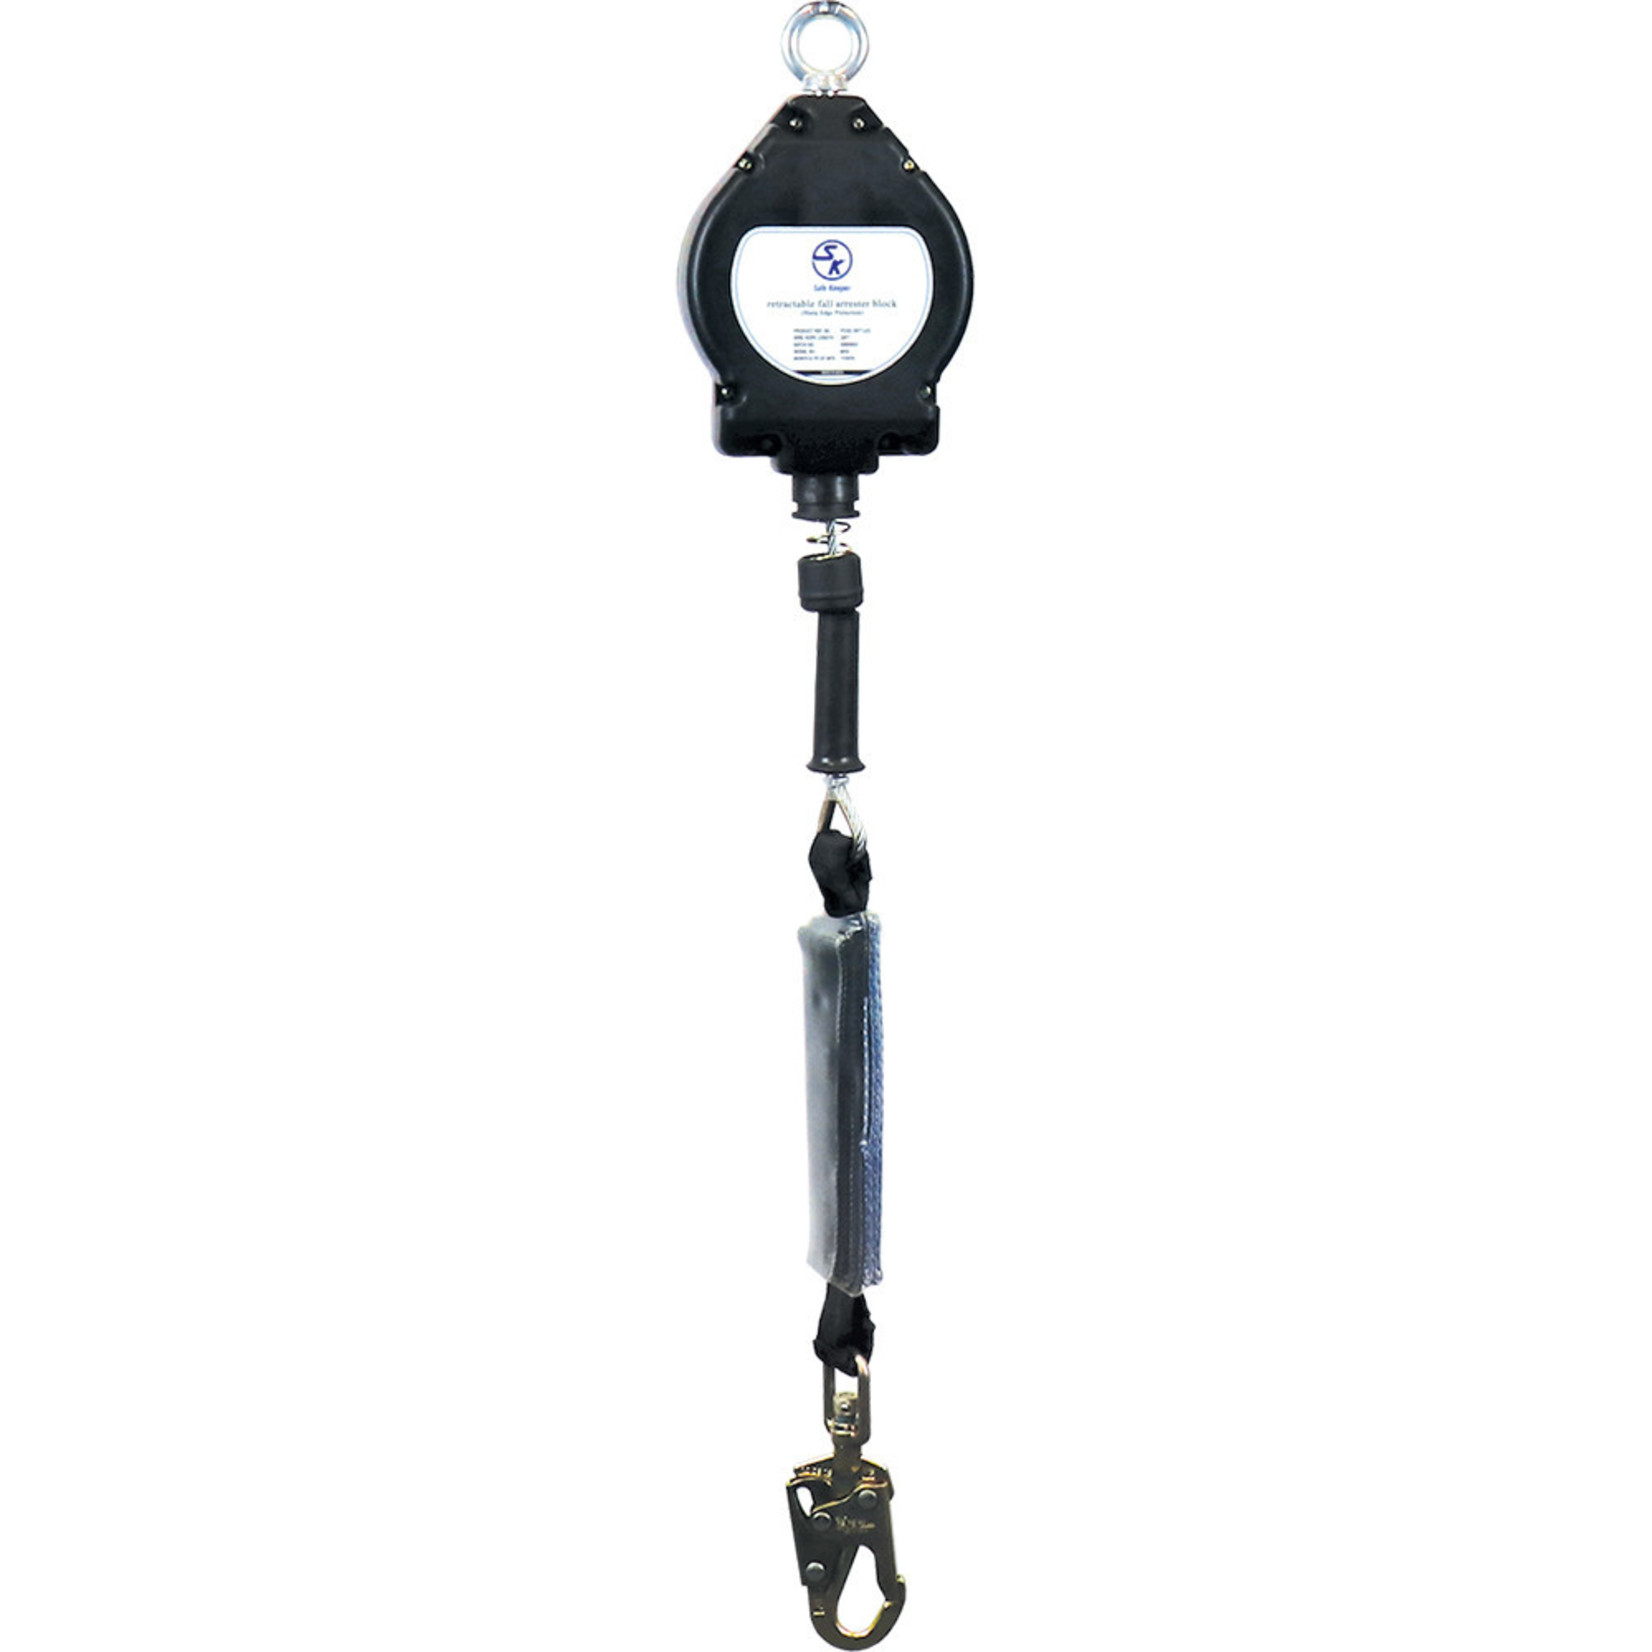 Safe Keeper Walkabout Robust™ 20ft Leading-Edge Cable Wire Self-Retracting Lifeline